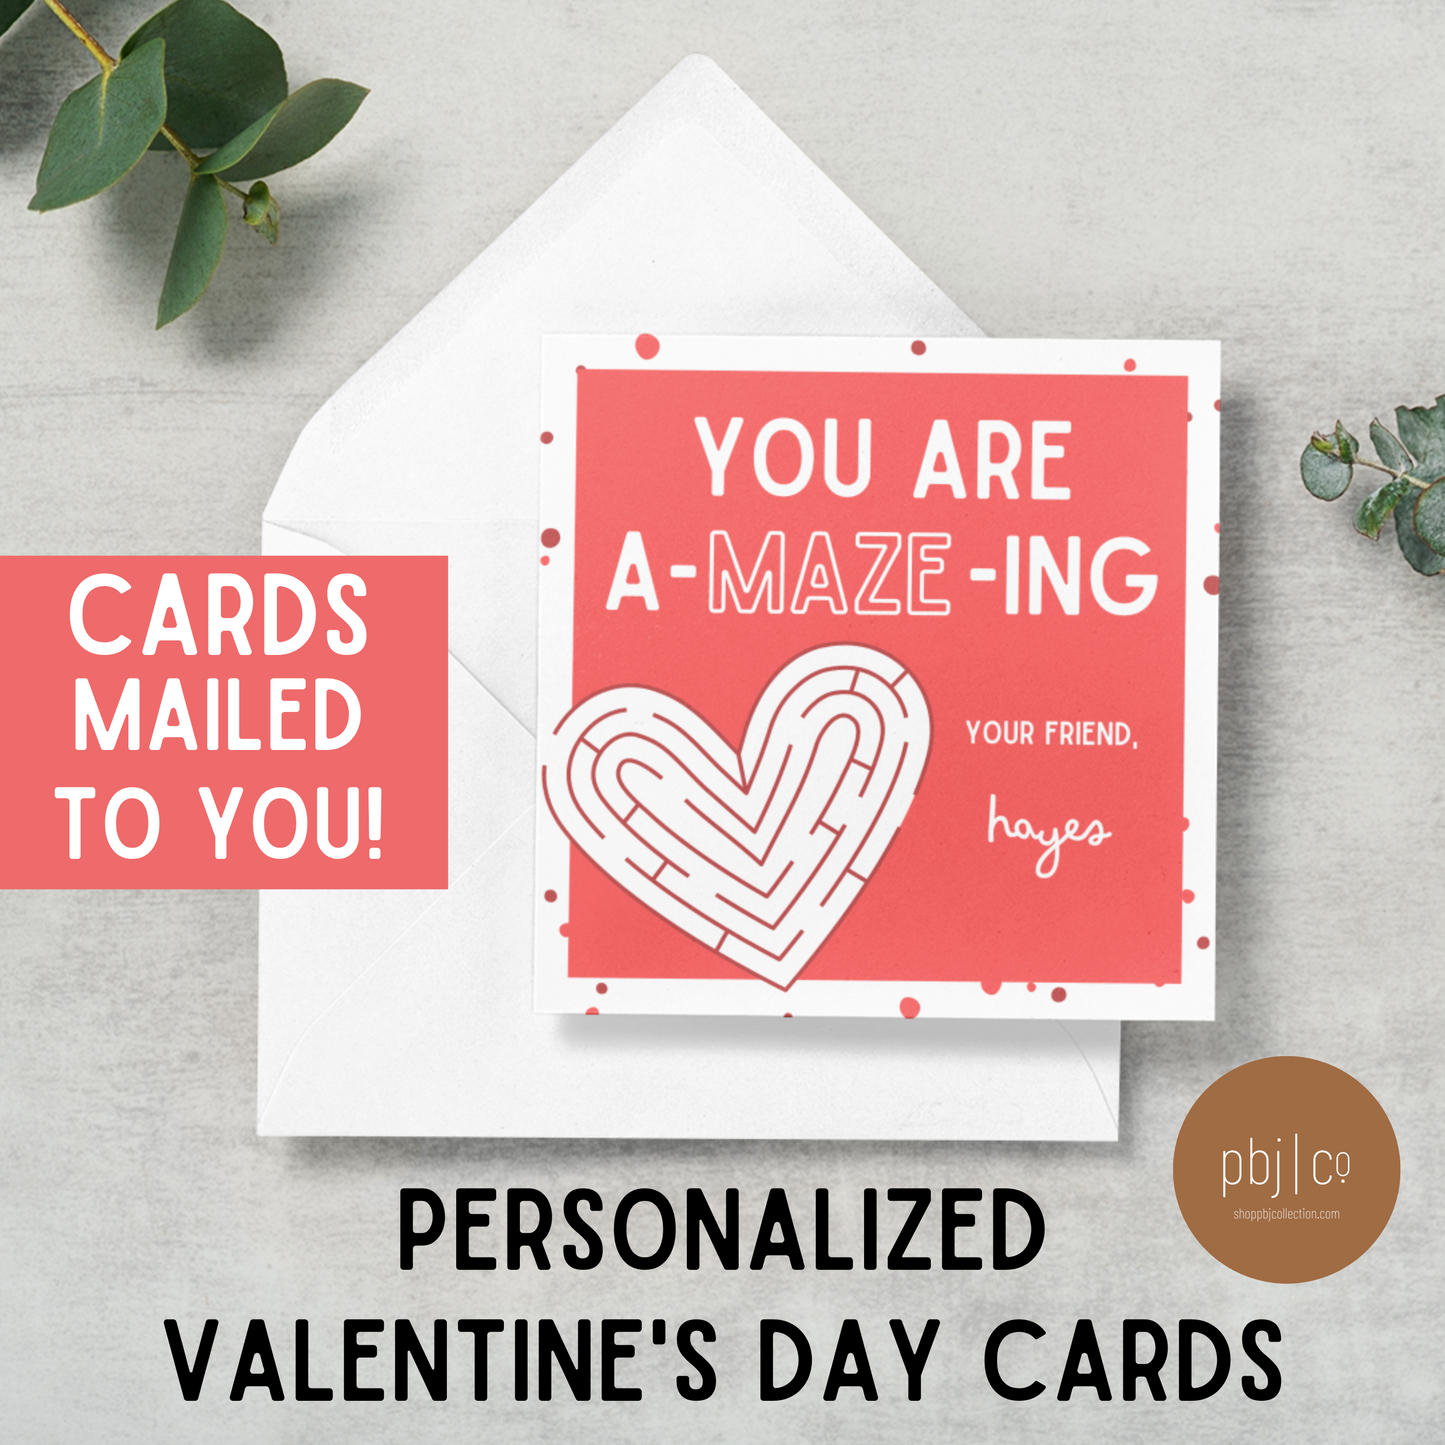 PRINTED Kids Customized Maze Valentine's Day Set of 24 Cards Favors Boy Girl Valentines Gift Tag With Envelopes Classroom Daycare Preschool Teacher